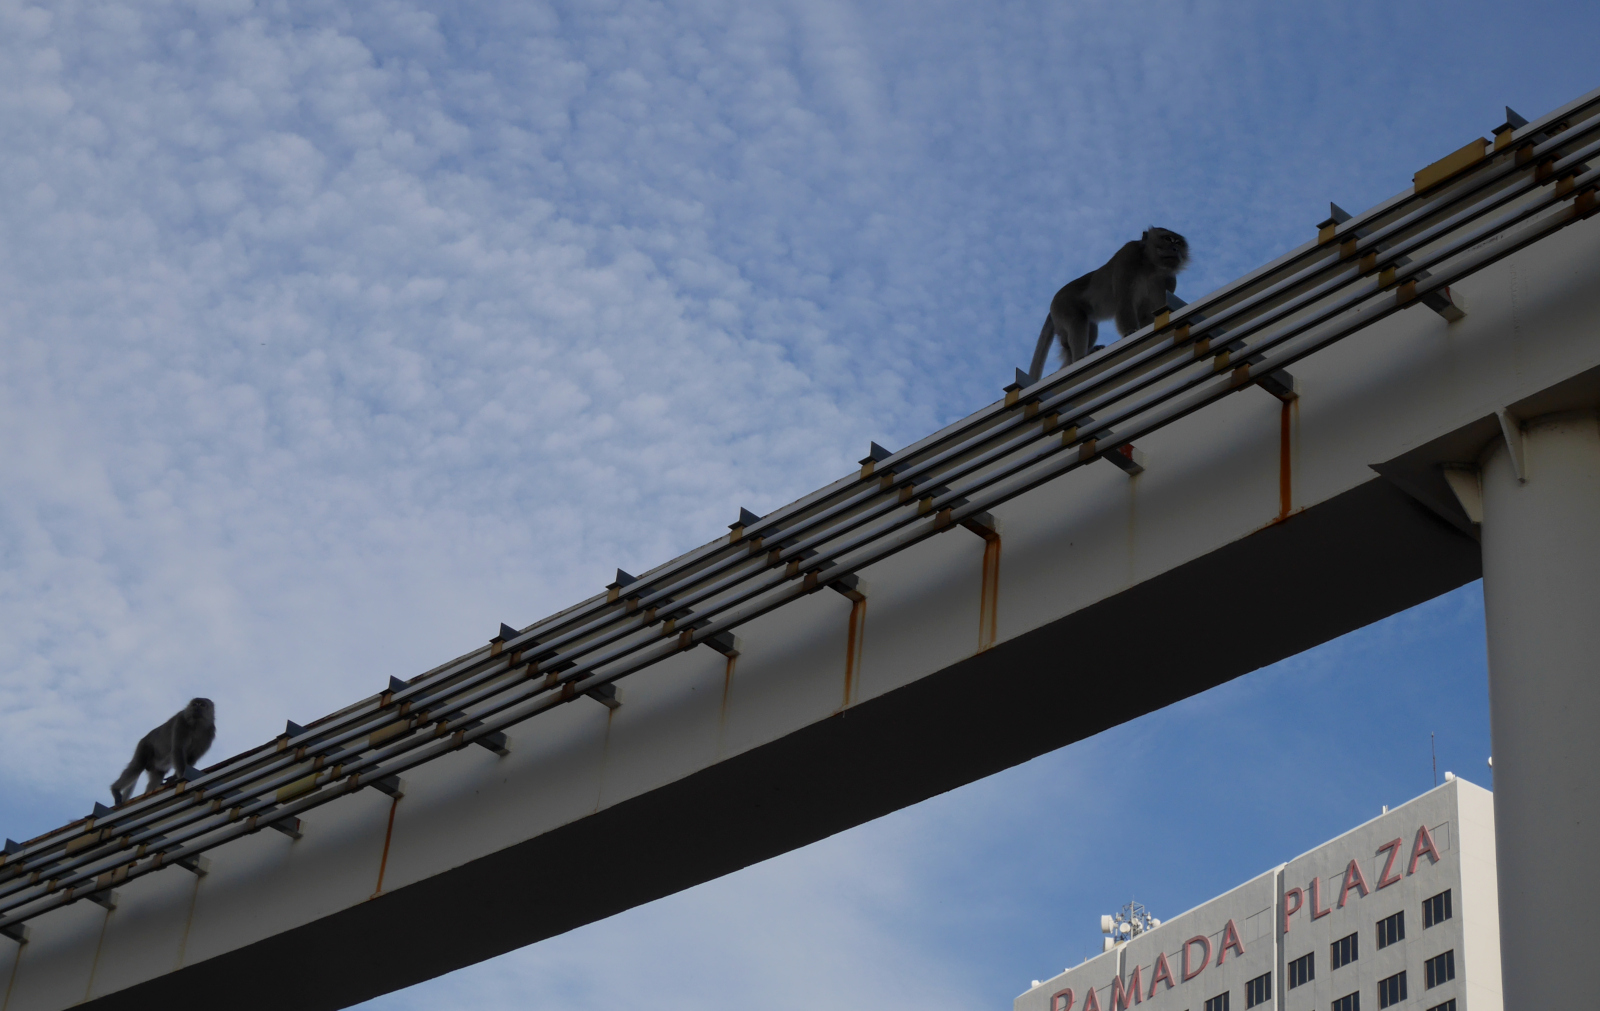 Long-tailed macaques (Macaca fascicularis) stalking along the elevated trackway of the monorail.